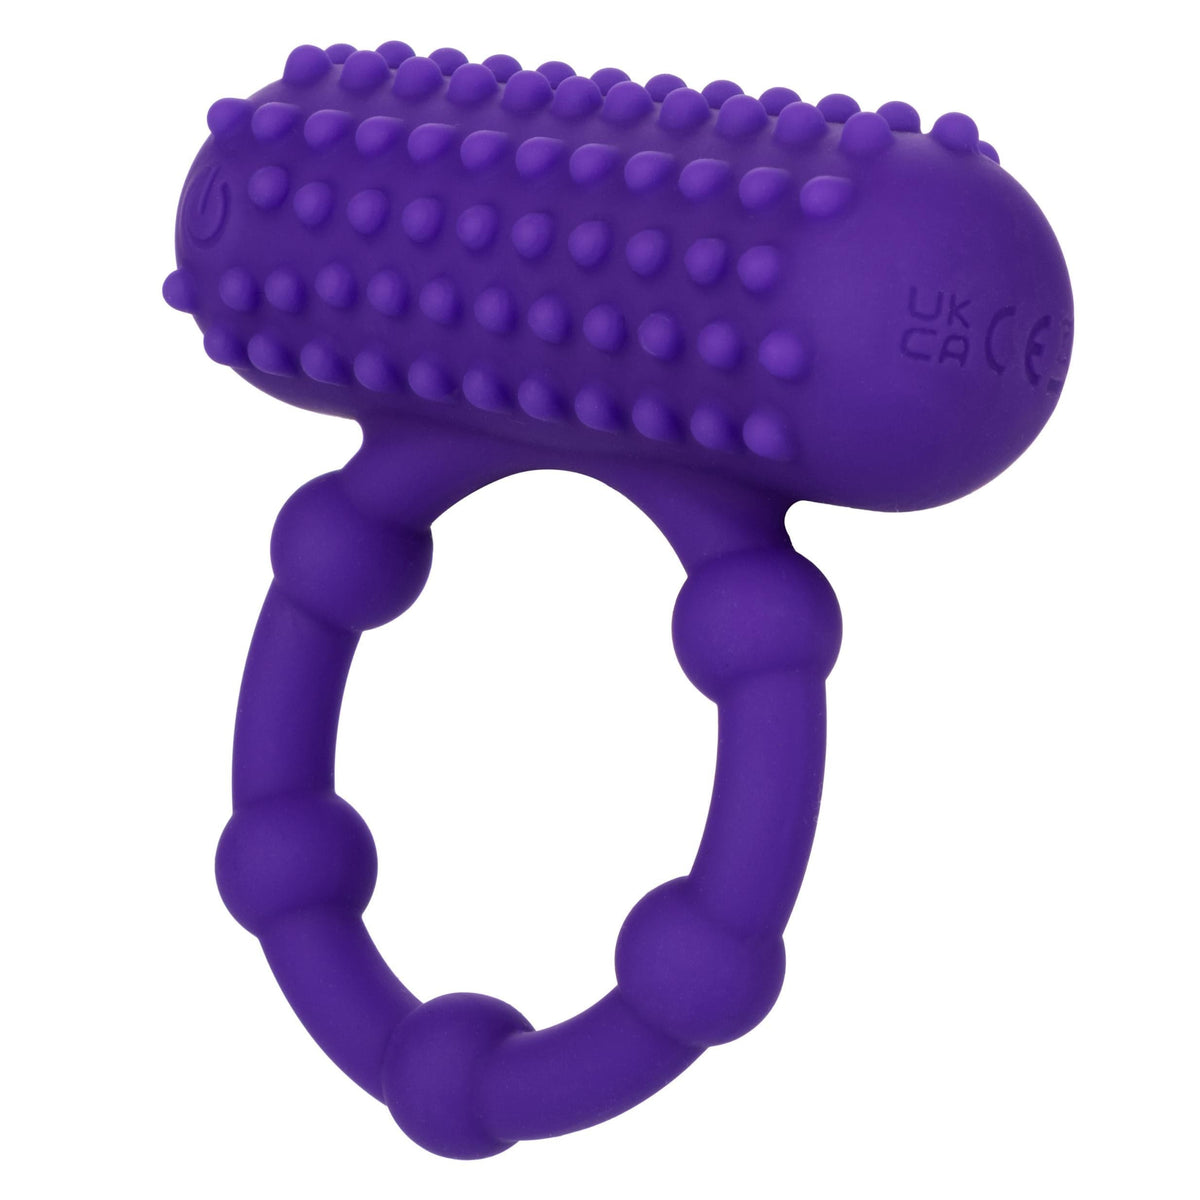 silicone rechargeable 5 bead maximus ring purple